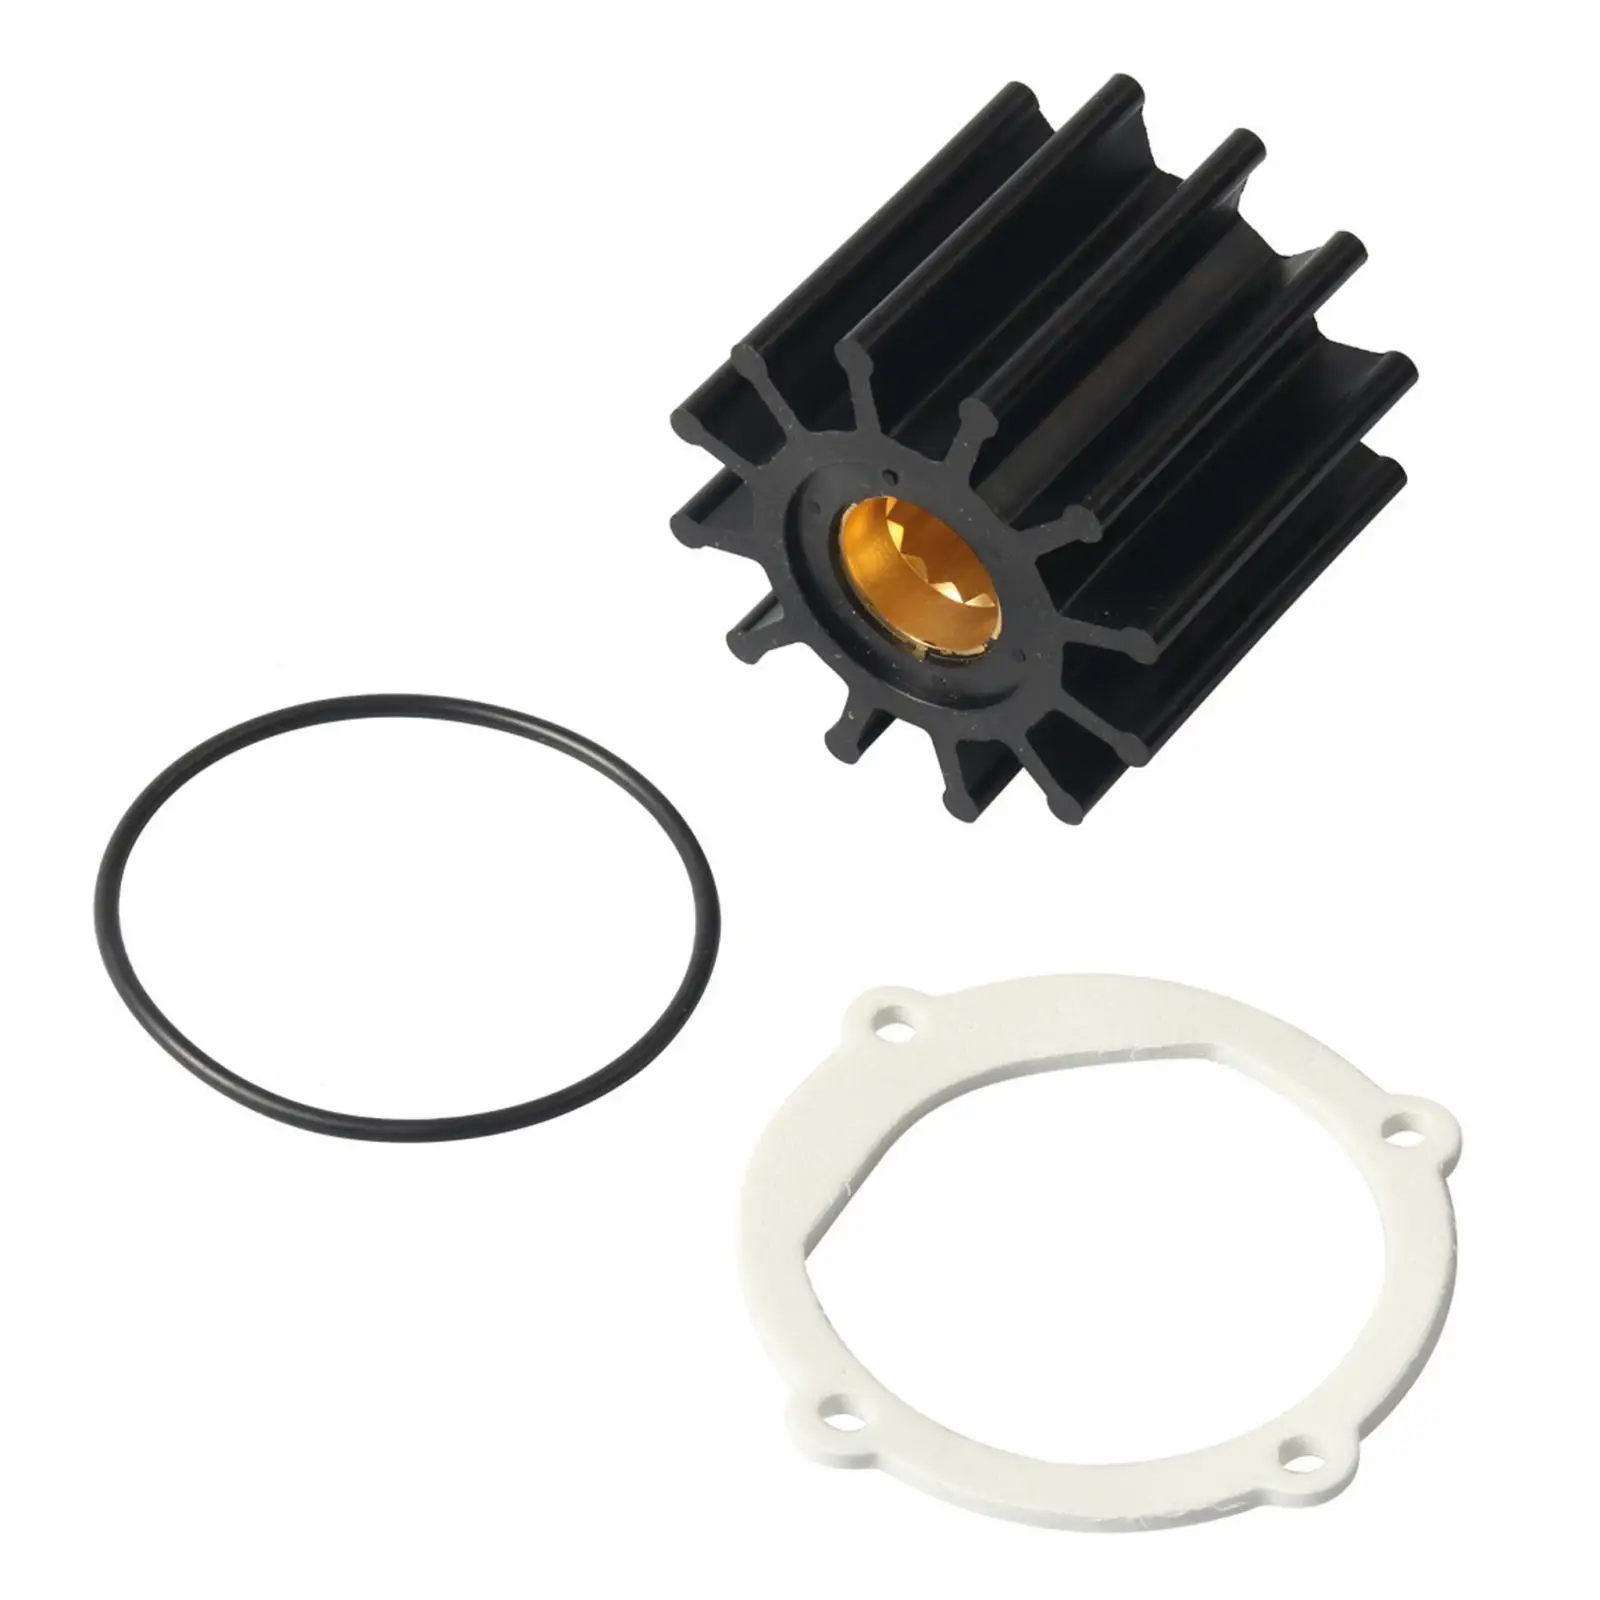 

Water Pump Impeller Service Kits 102480501 Replace Boat Motor Engine Parts Accessories Repair Part Sturdy Marine Propeller Parts